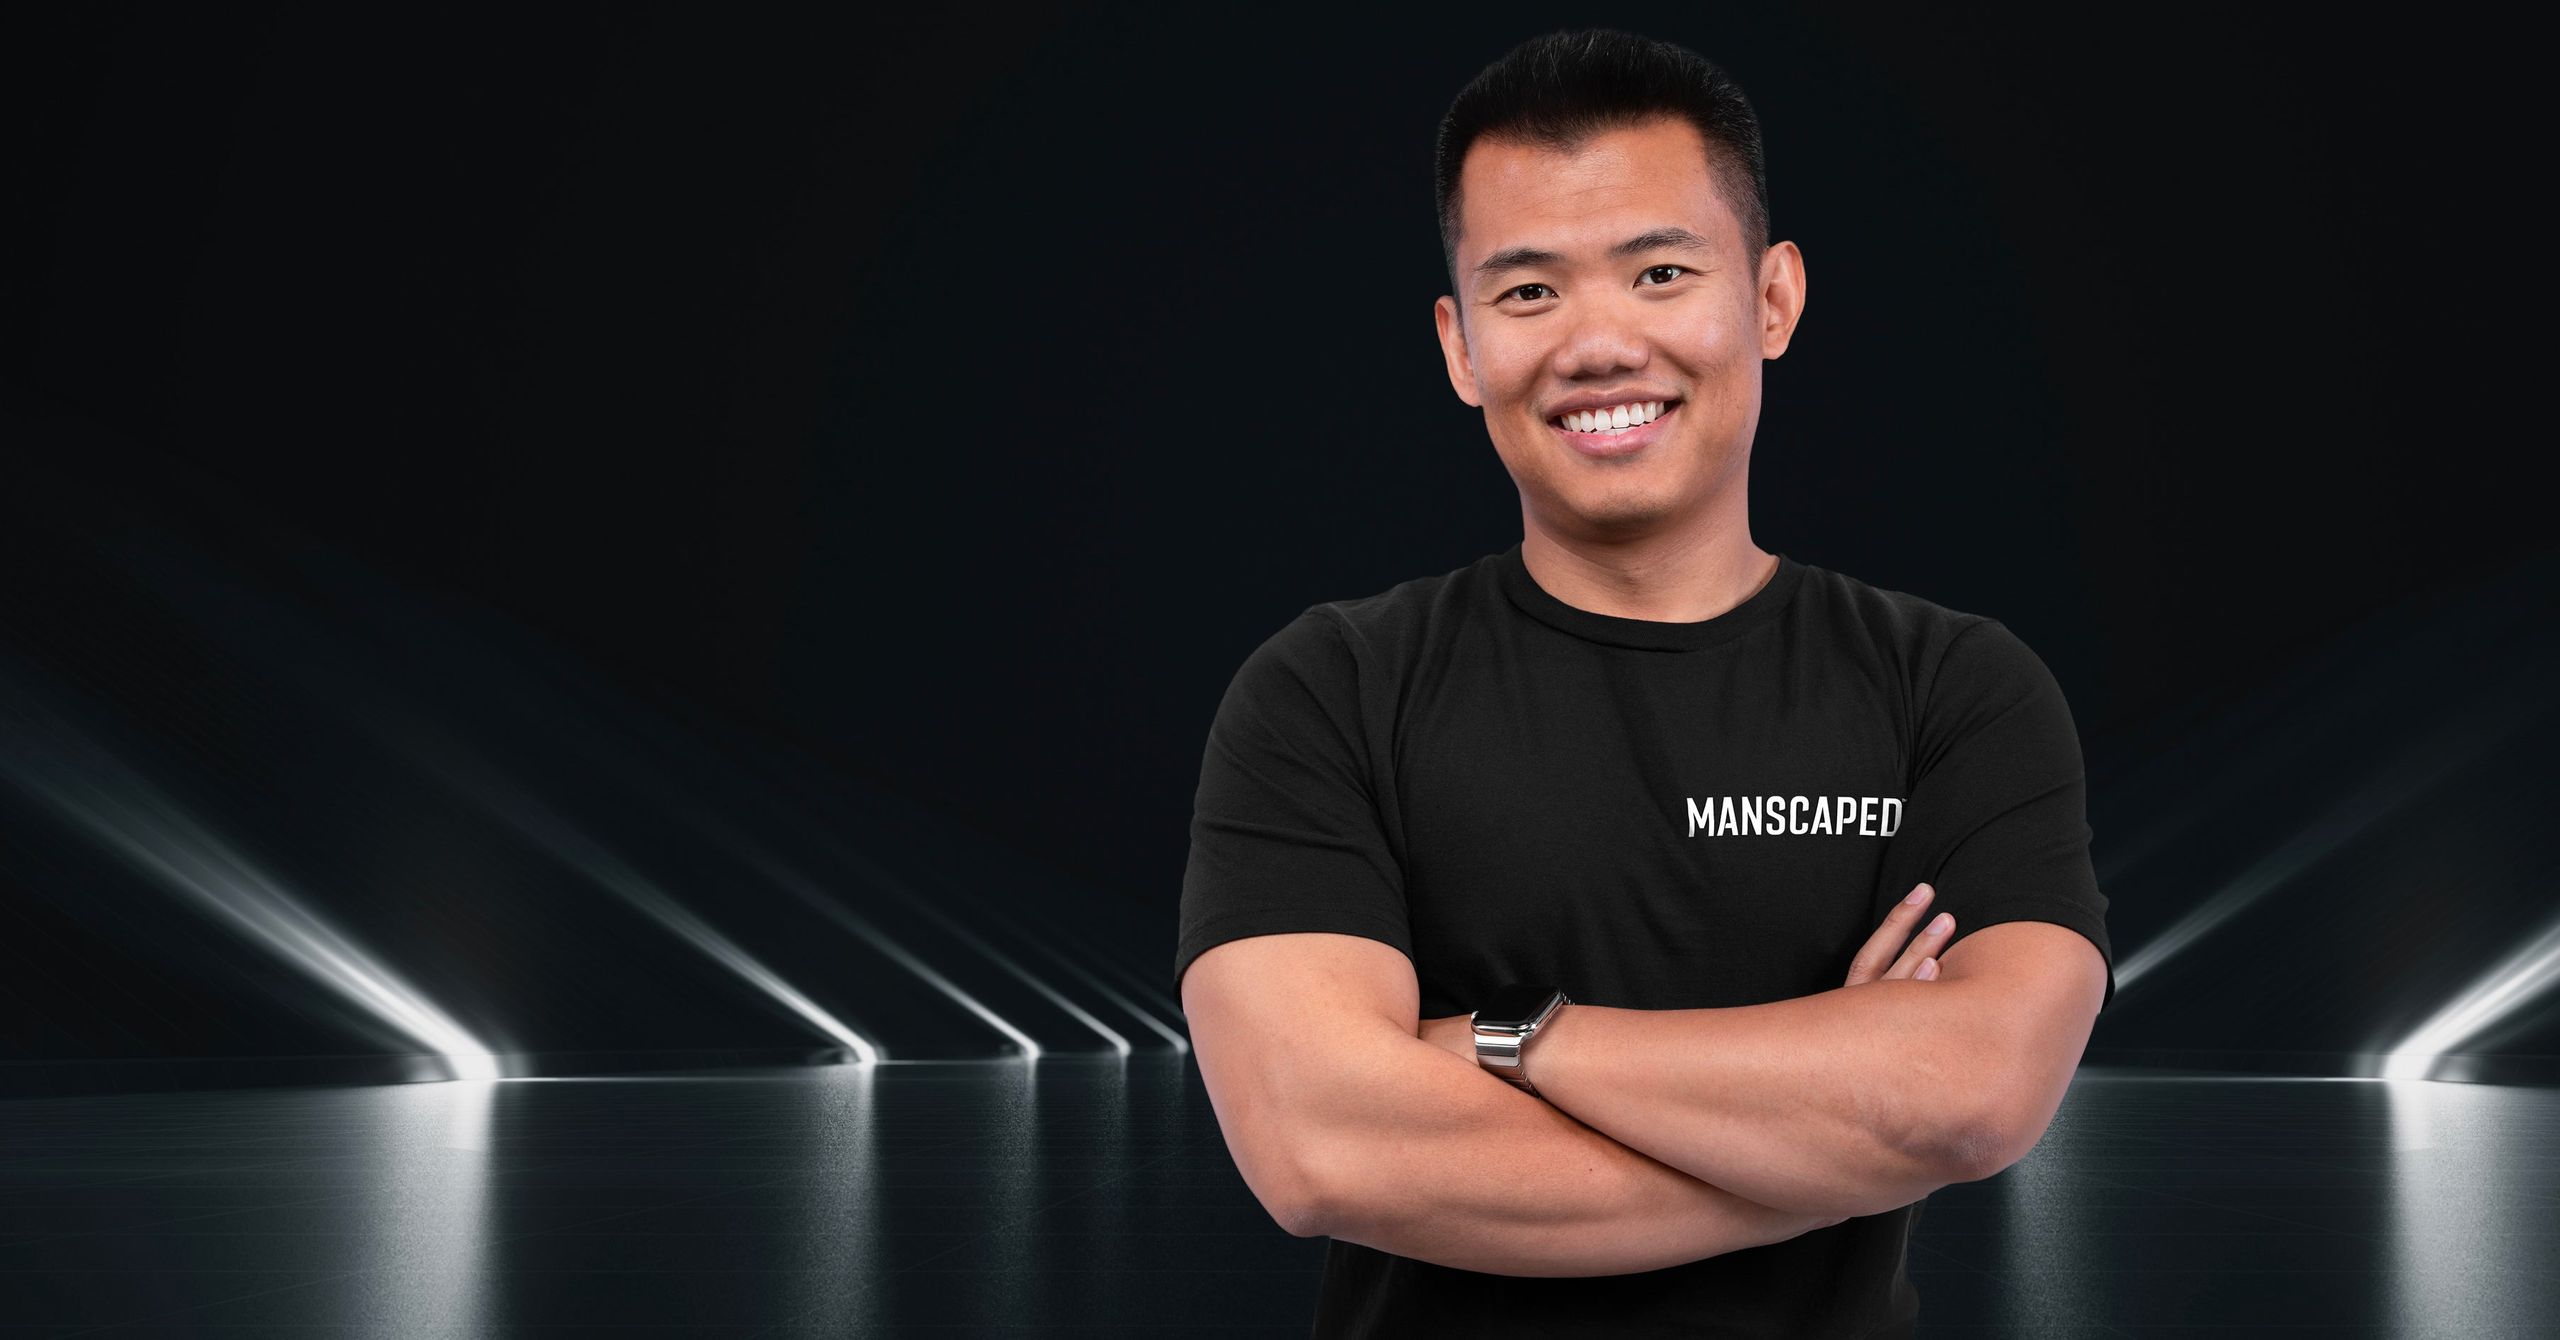 Founder and CEO of Manscaped Paul Tran